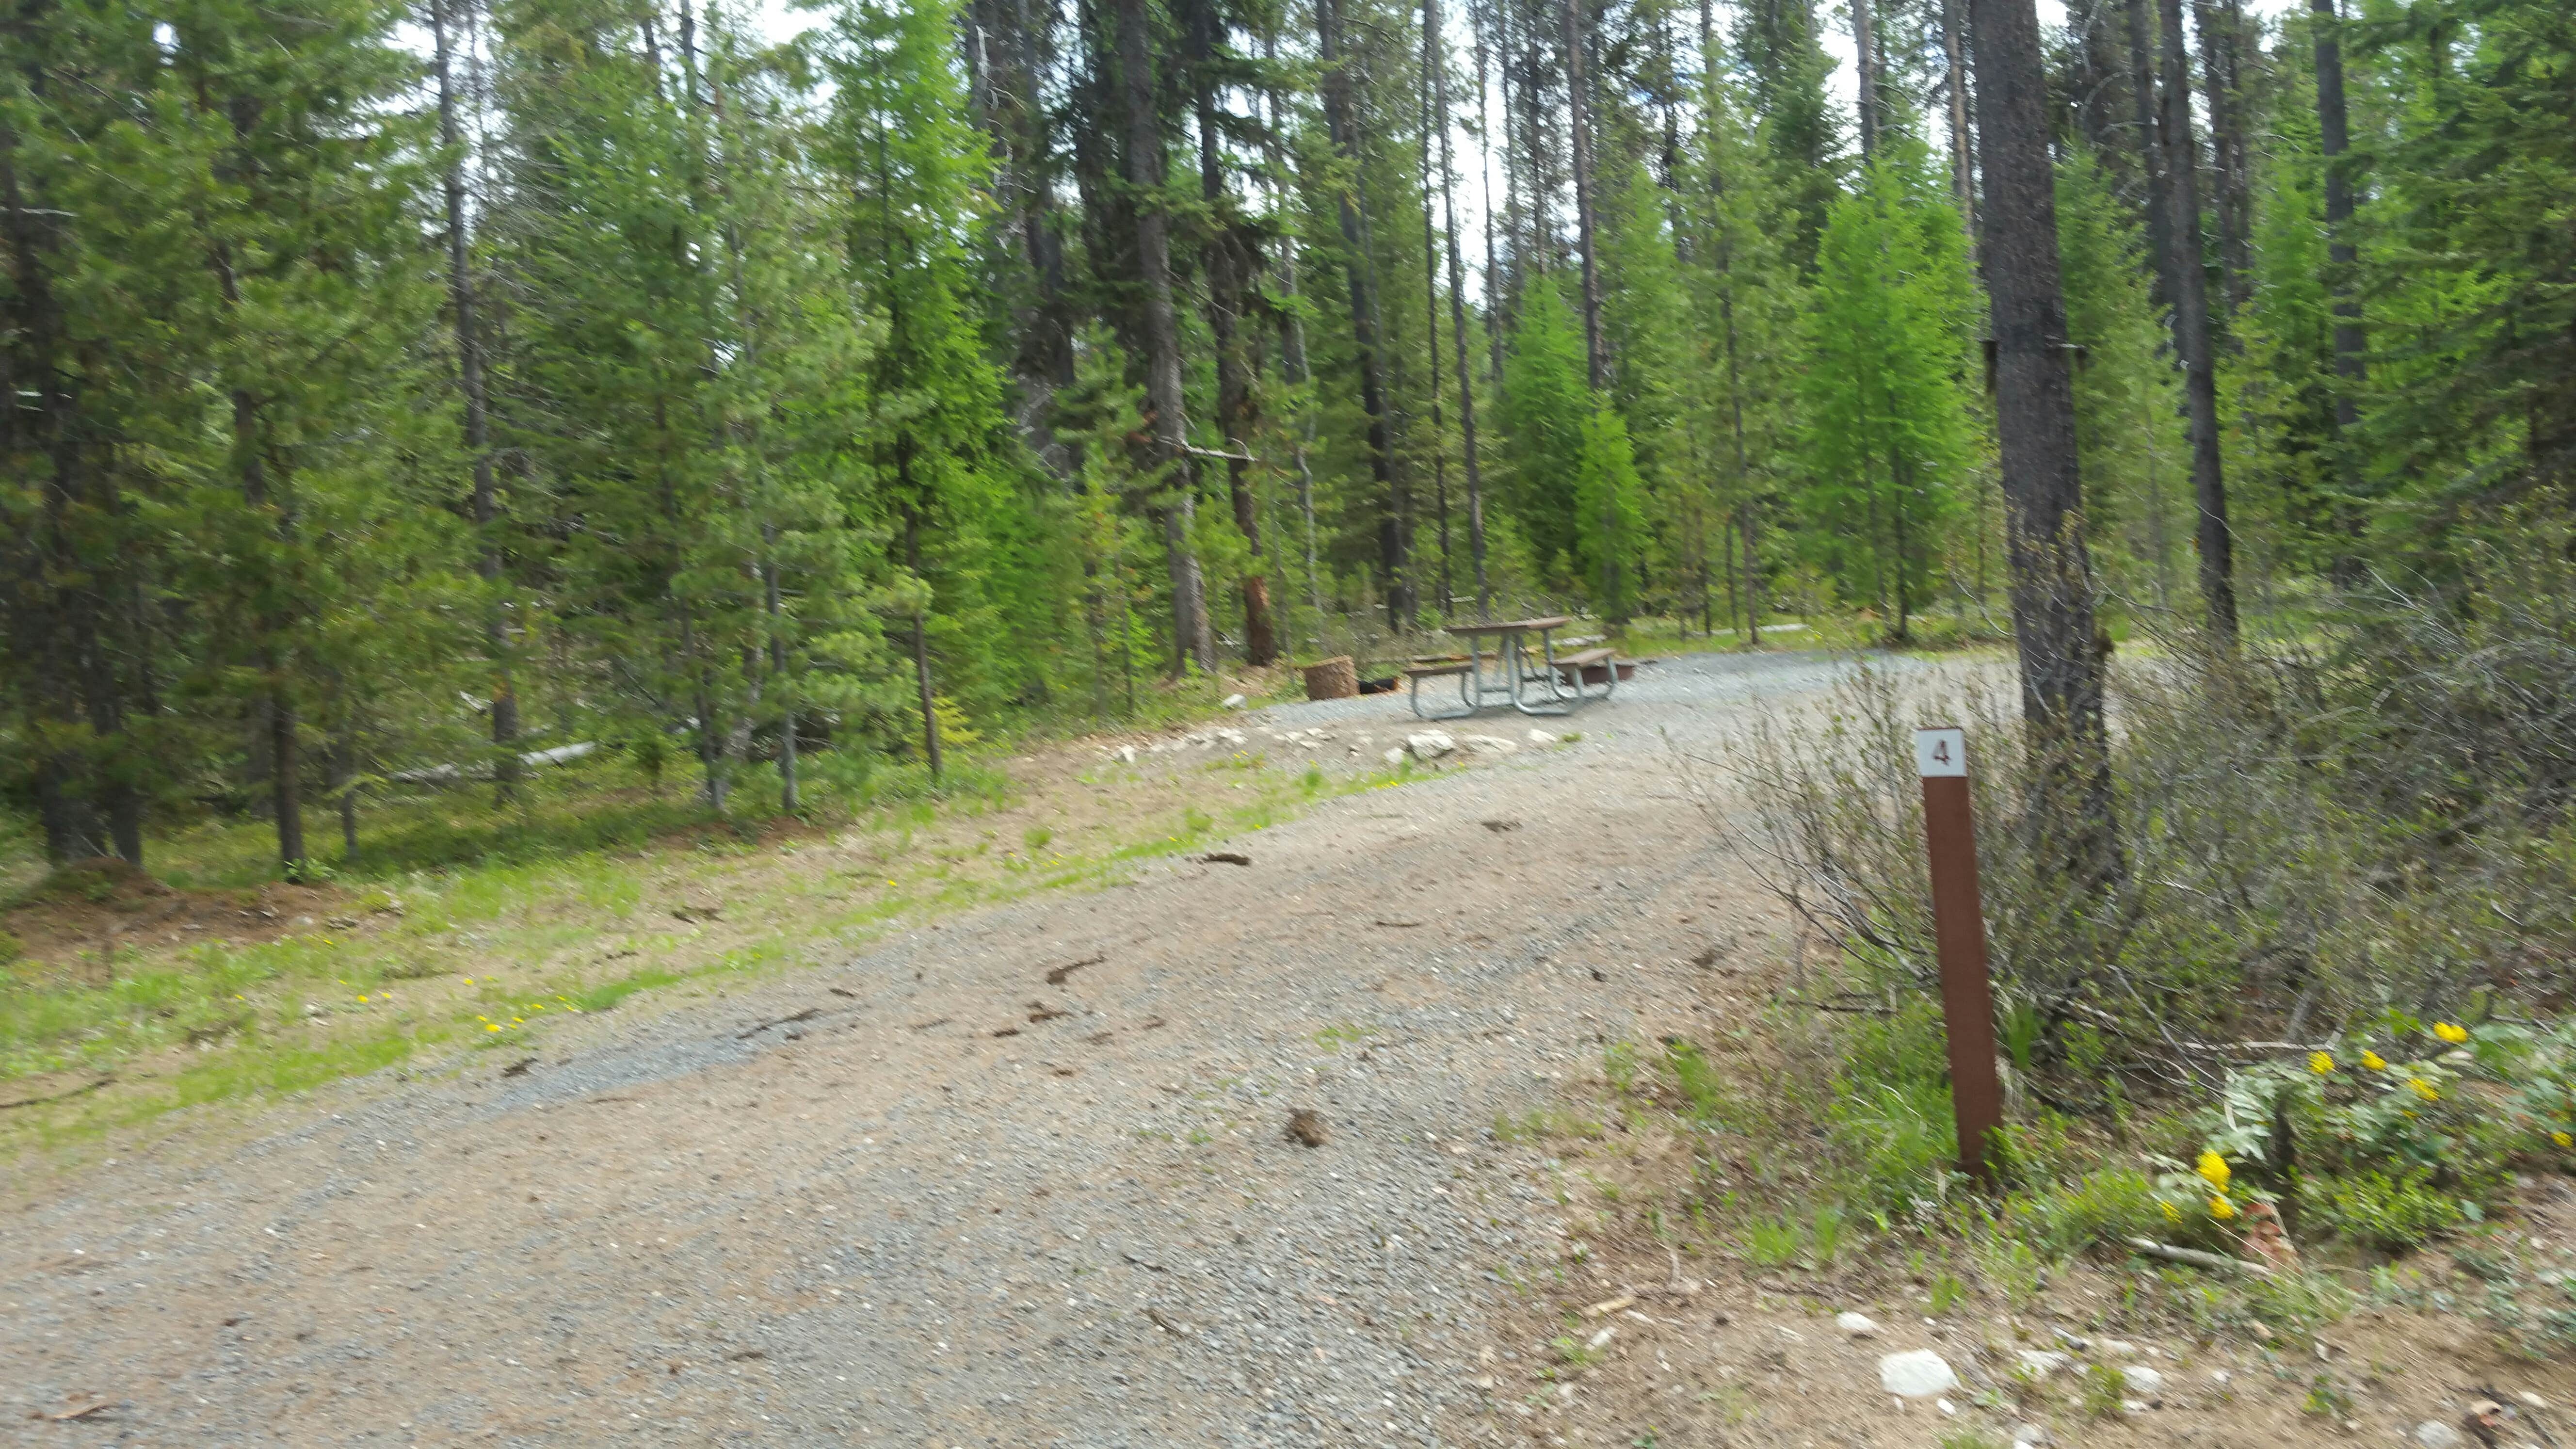 Camper submitted image from Sherry Creek Campground  - 4